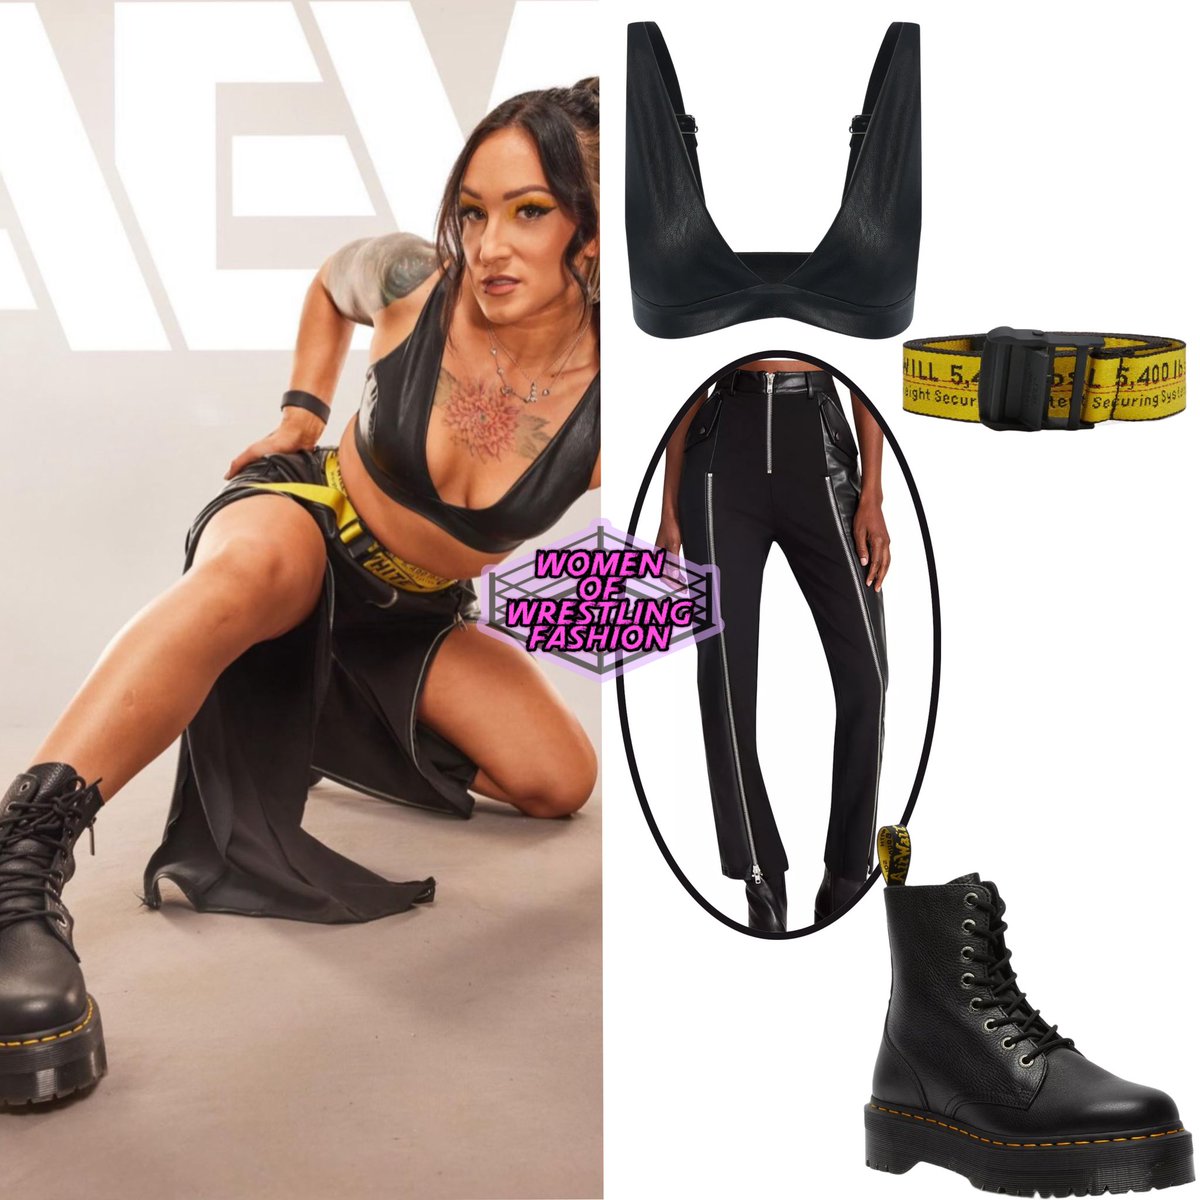 For #AEWDynamite / #AEWRampage, Kris wore the Faux Leather Bra Top from Naked Wardrobe ($64), Classic Industrial Belt from Off-White (sold out), Carson High Waist Faux Leather Pants from Steve Madden (sold out) & Jadon Pisa Leather Platform Boot from Dr. Martens ($210)